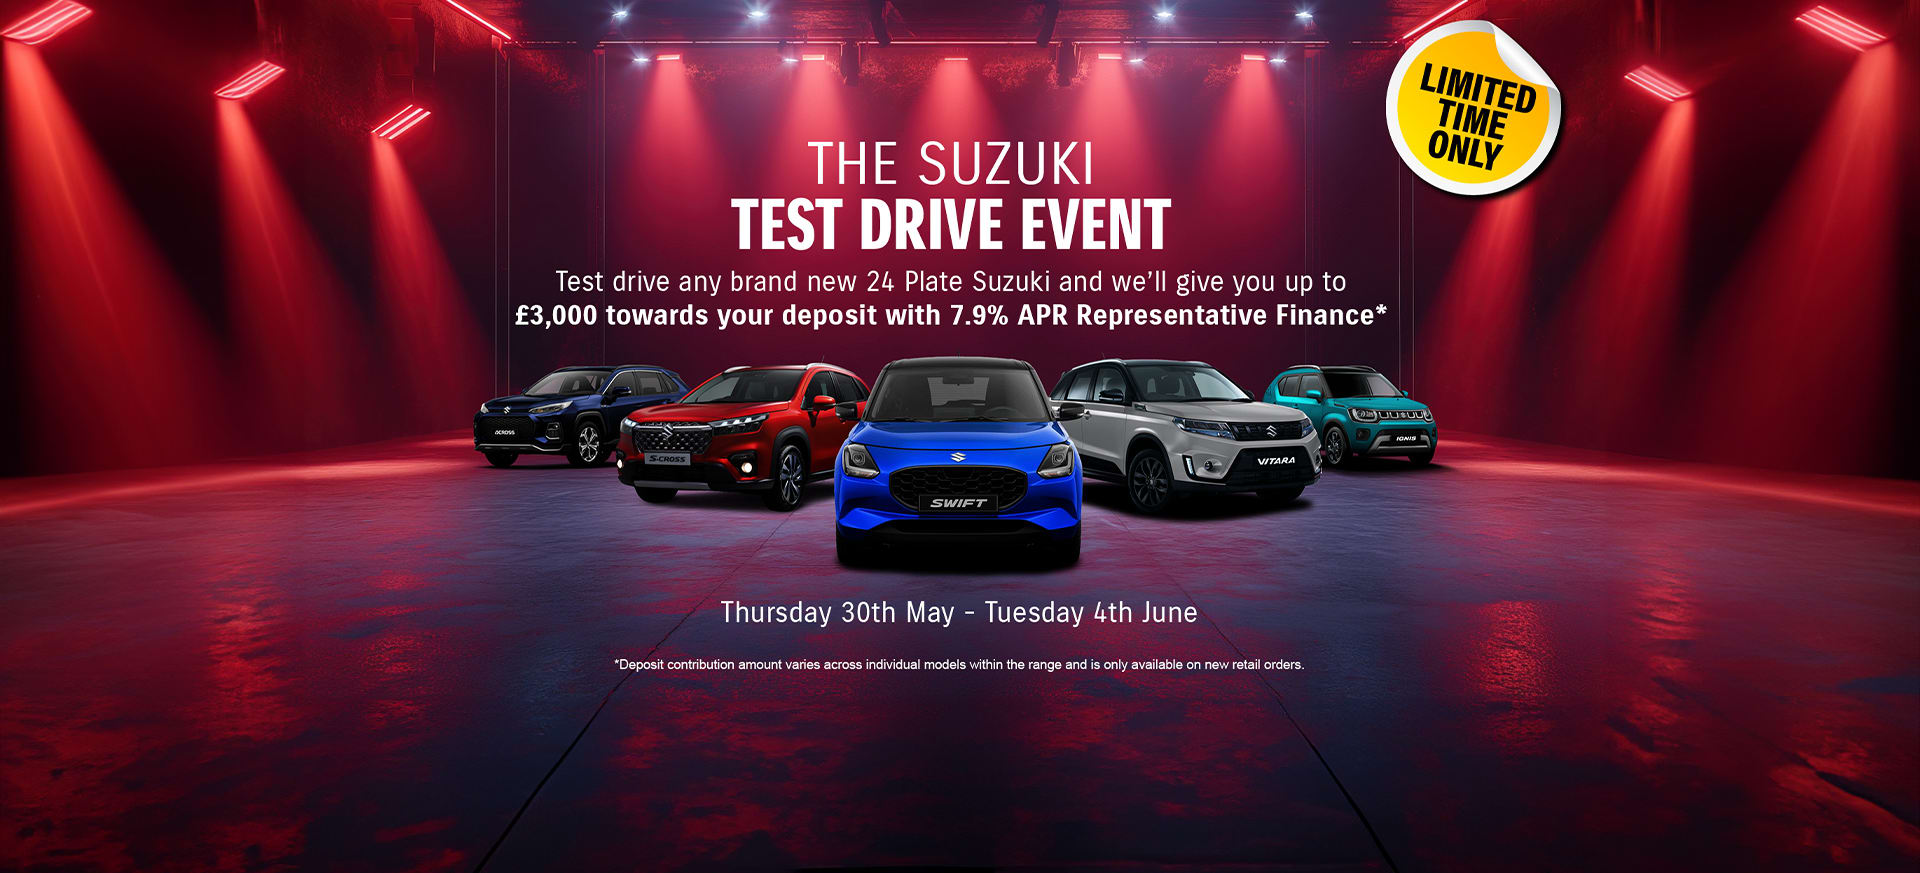 Test Drive Event